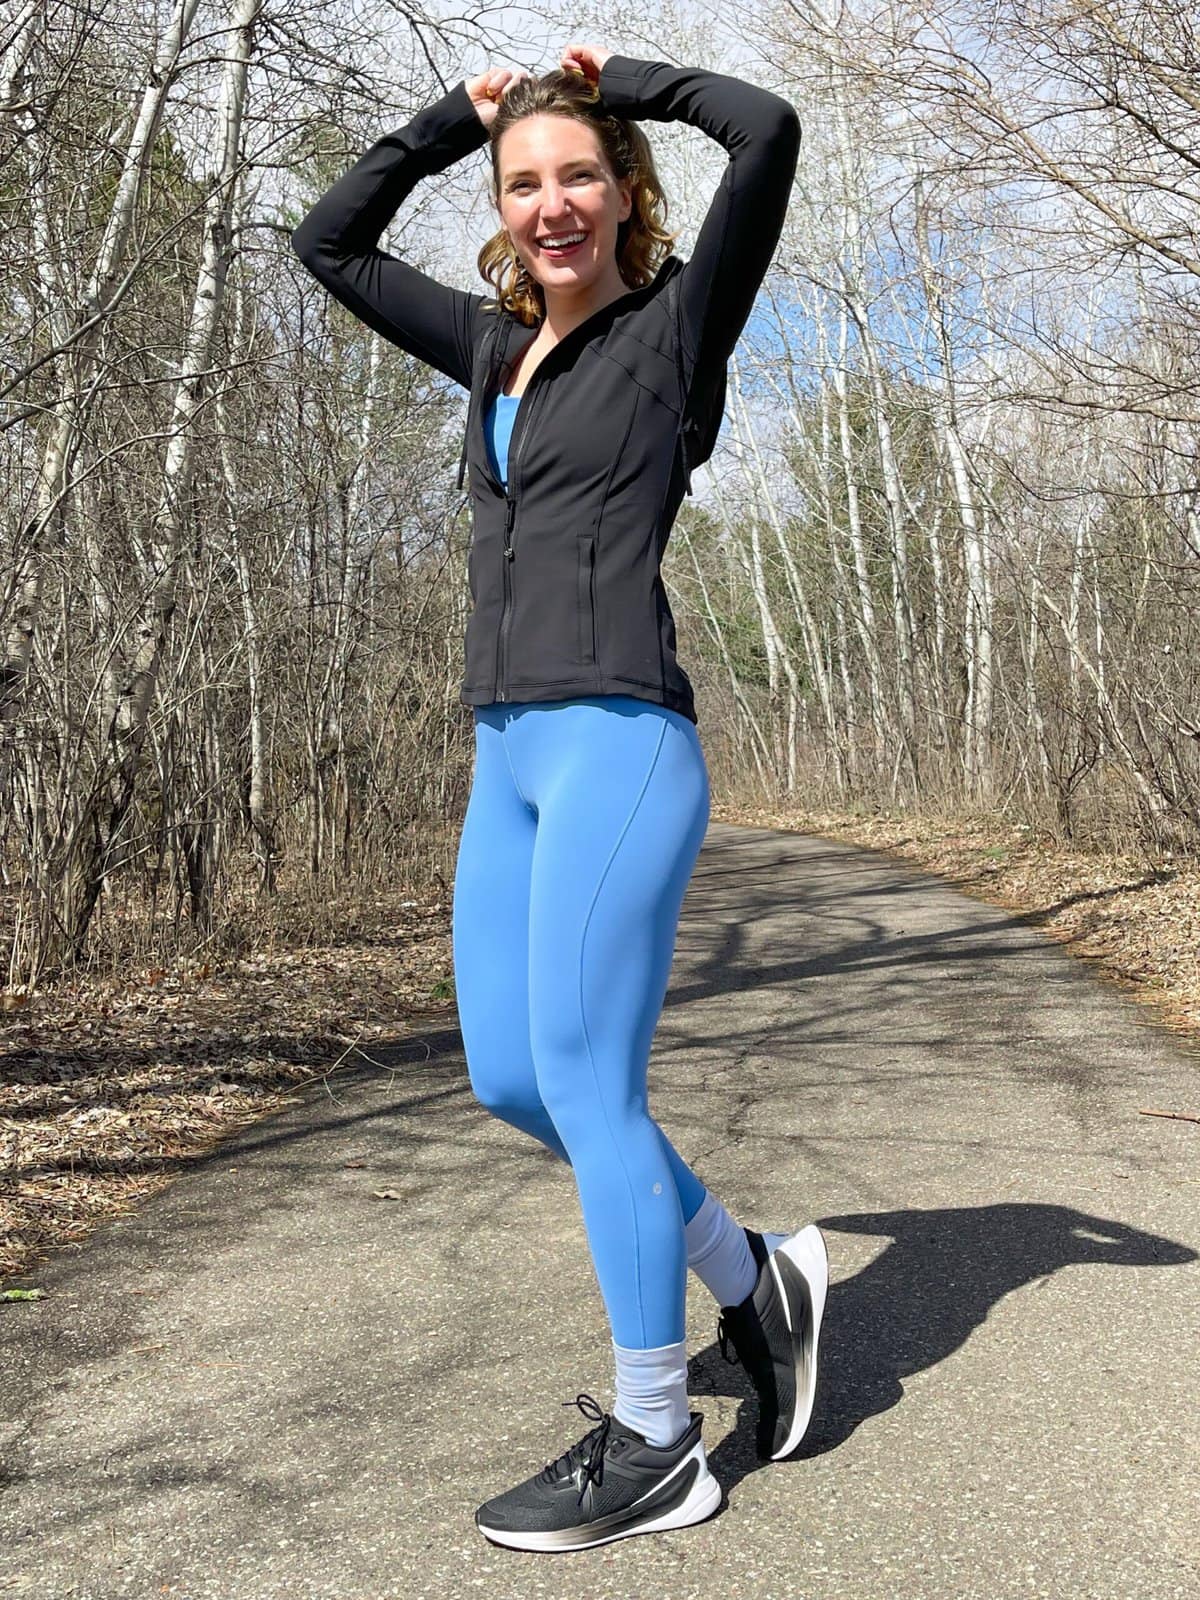 lululemon Training Shoes For Women (Review)